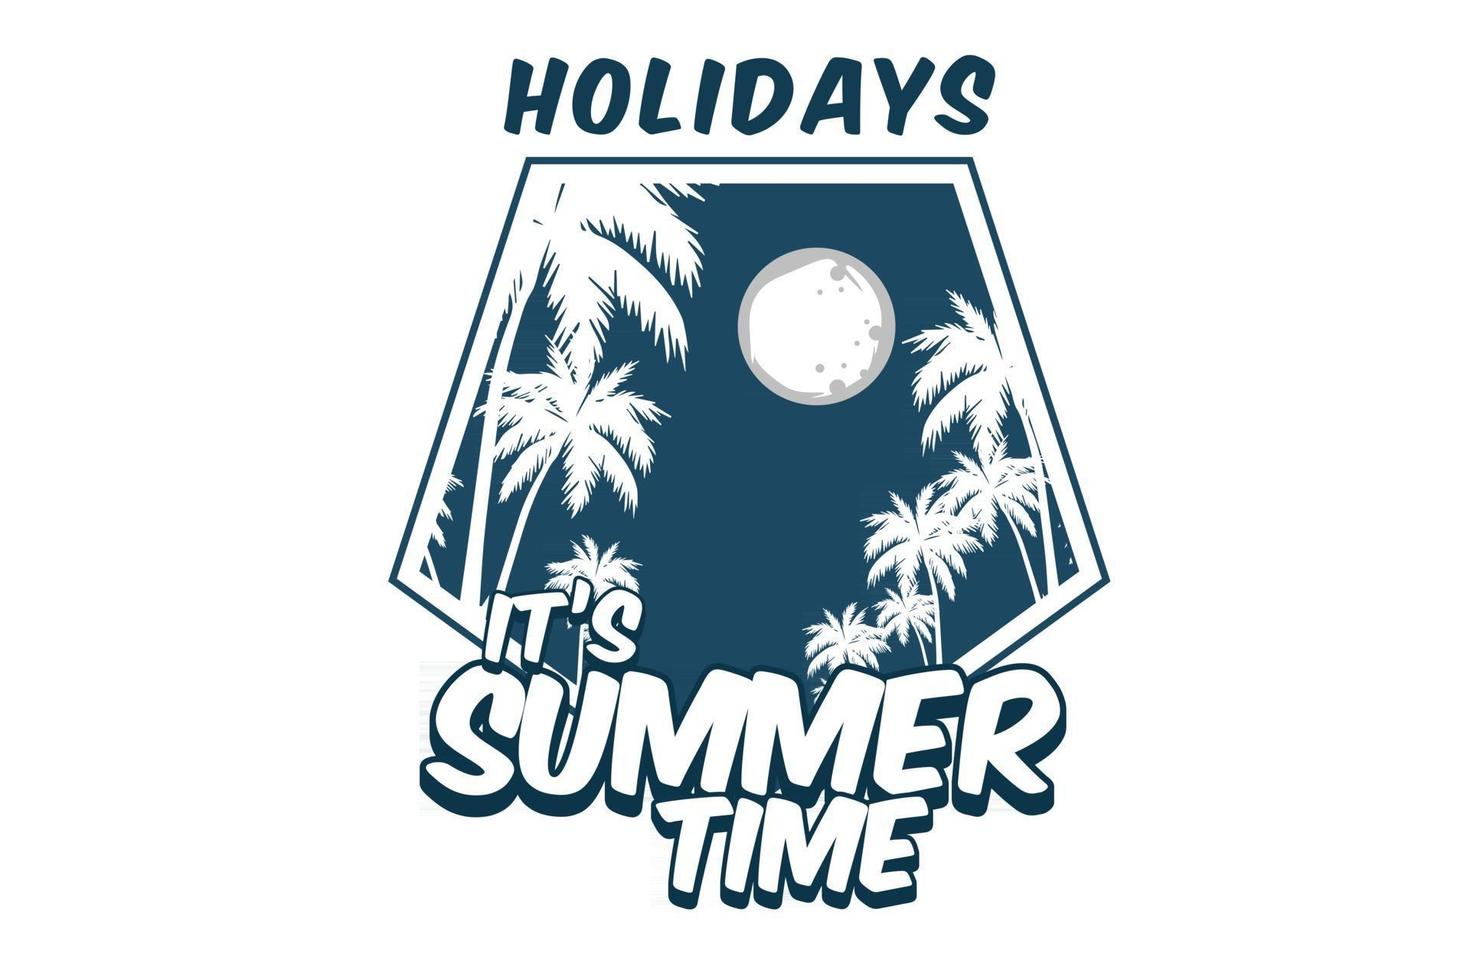 it's summer time silhouette design vector